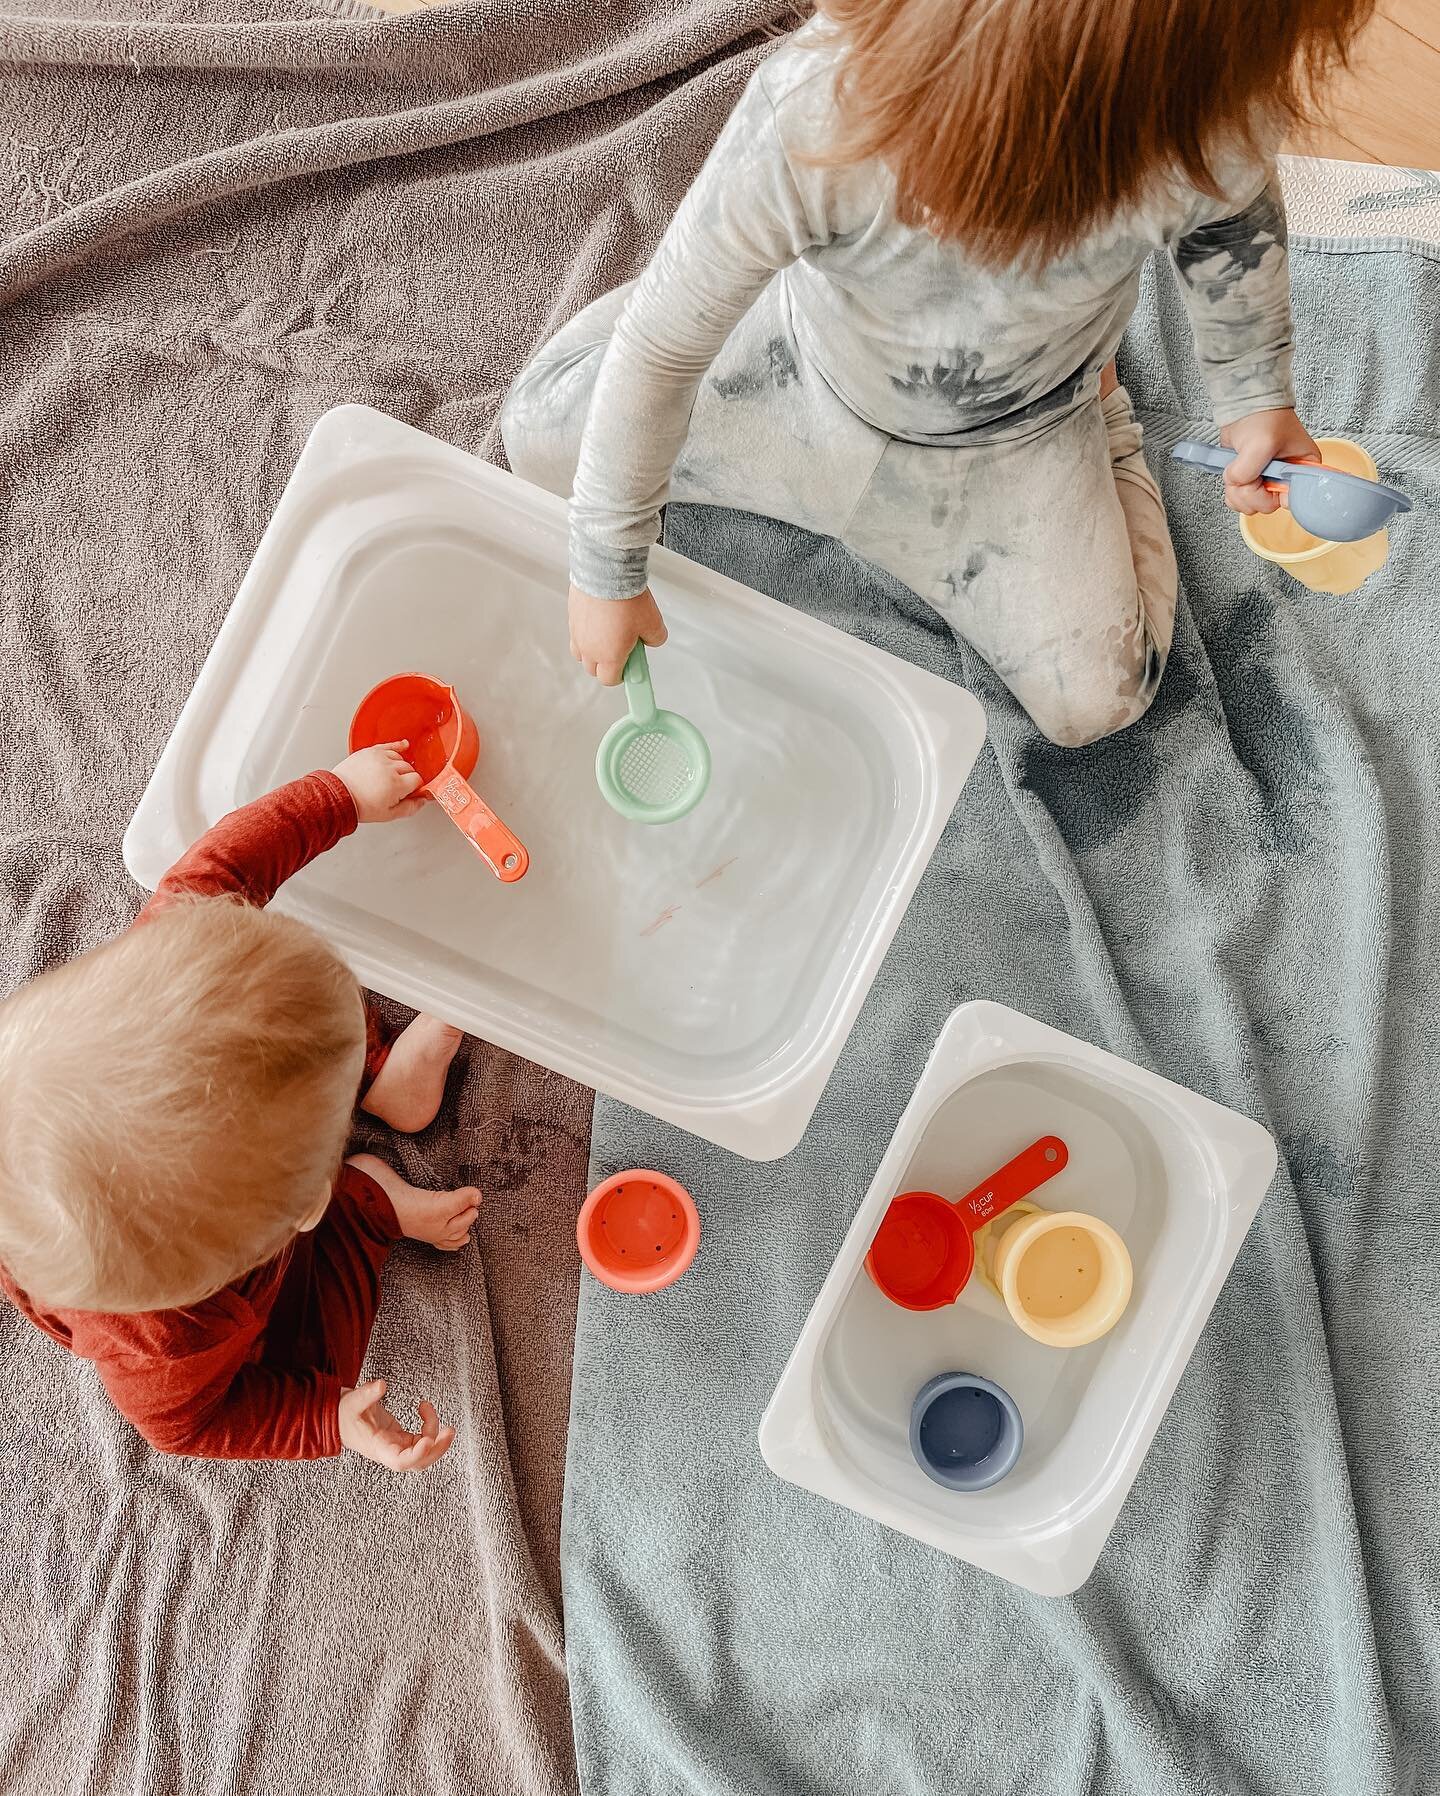 Just a reminder that sensory play doesn&rsquo;t need to be fancy or beautiful - it can be towels on the ground and pjs and measuring cups, bath toys and old beach toys in containers full of water. 

It&rsquo;s about exploring their senses, that&rsquo